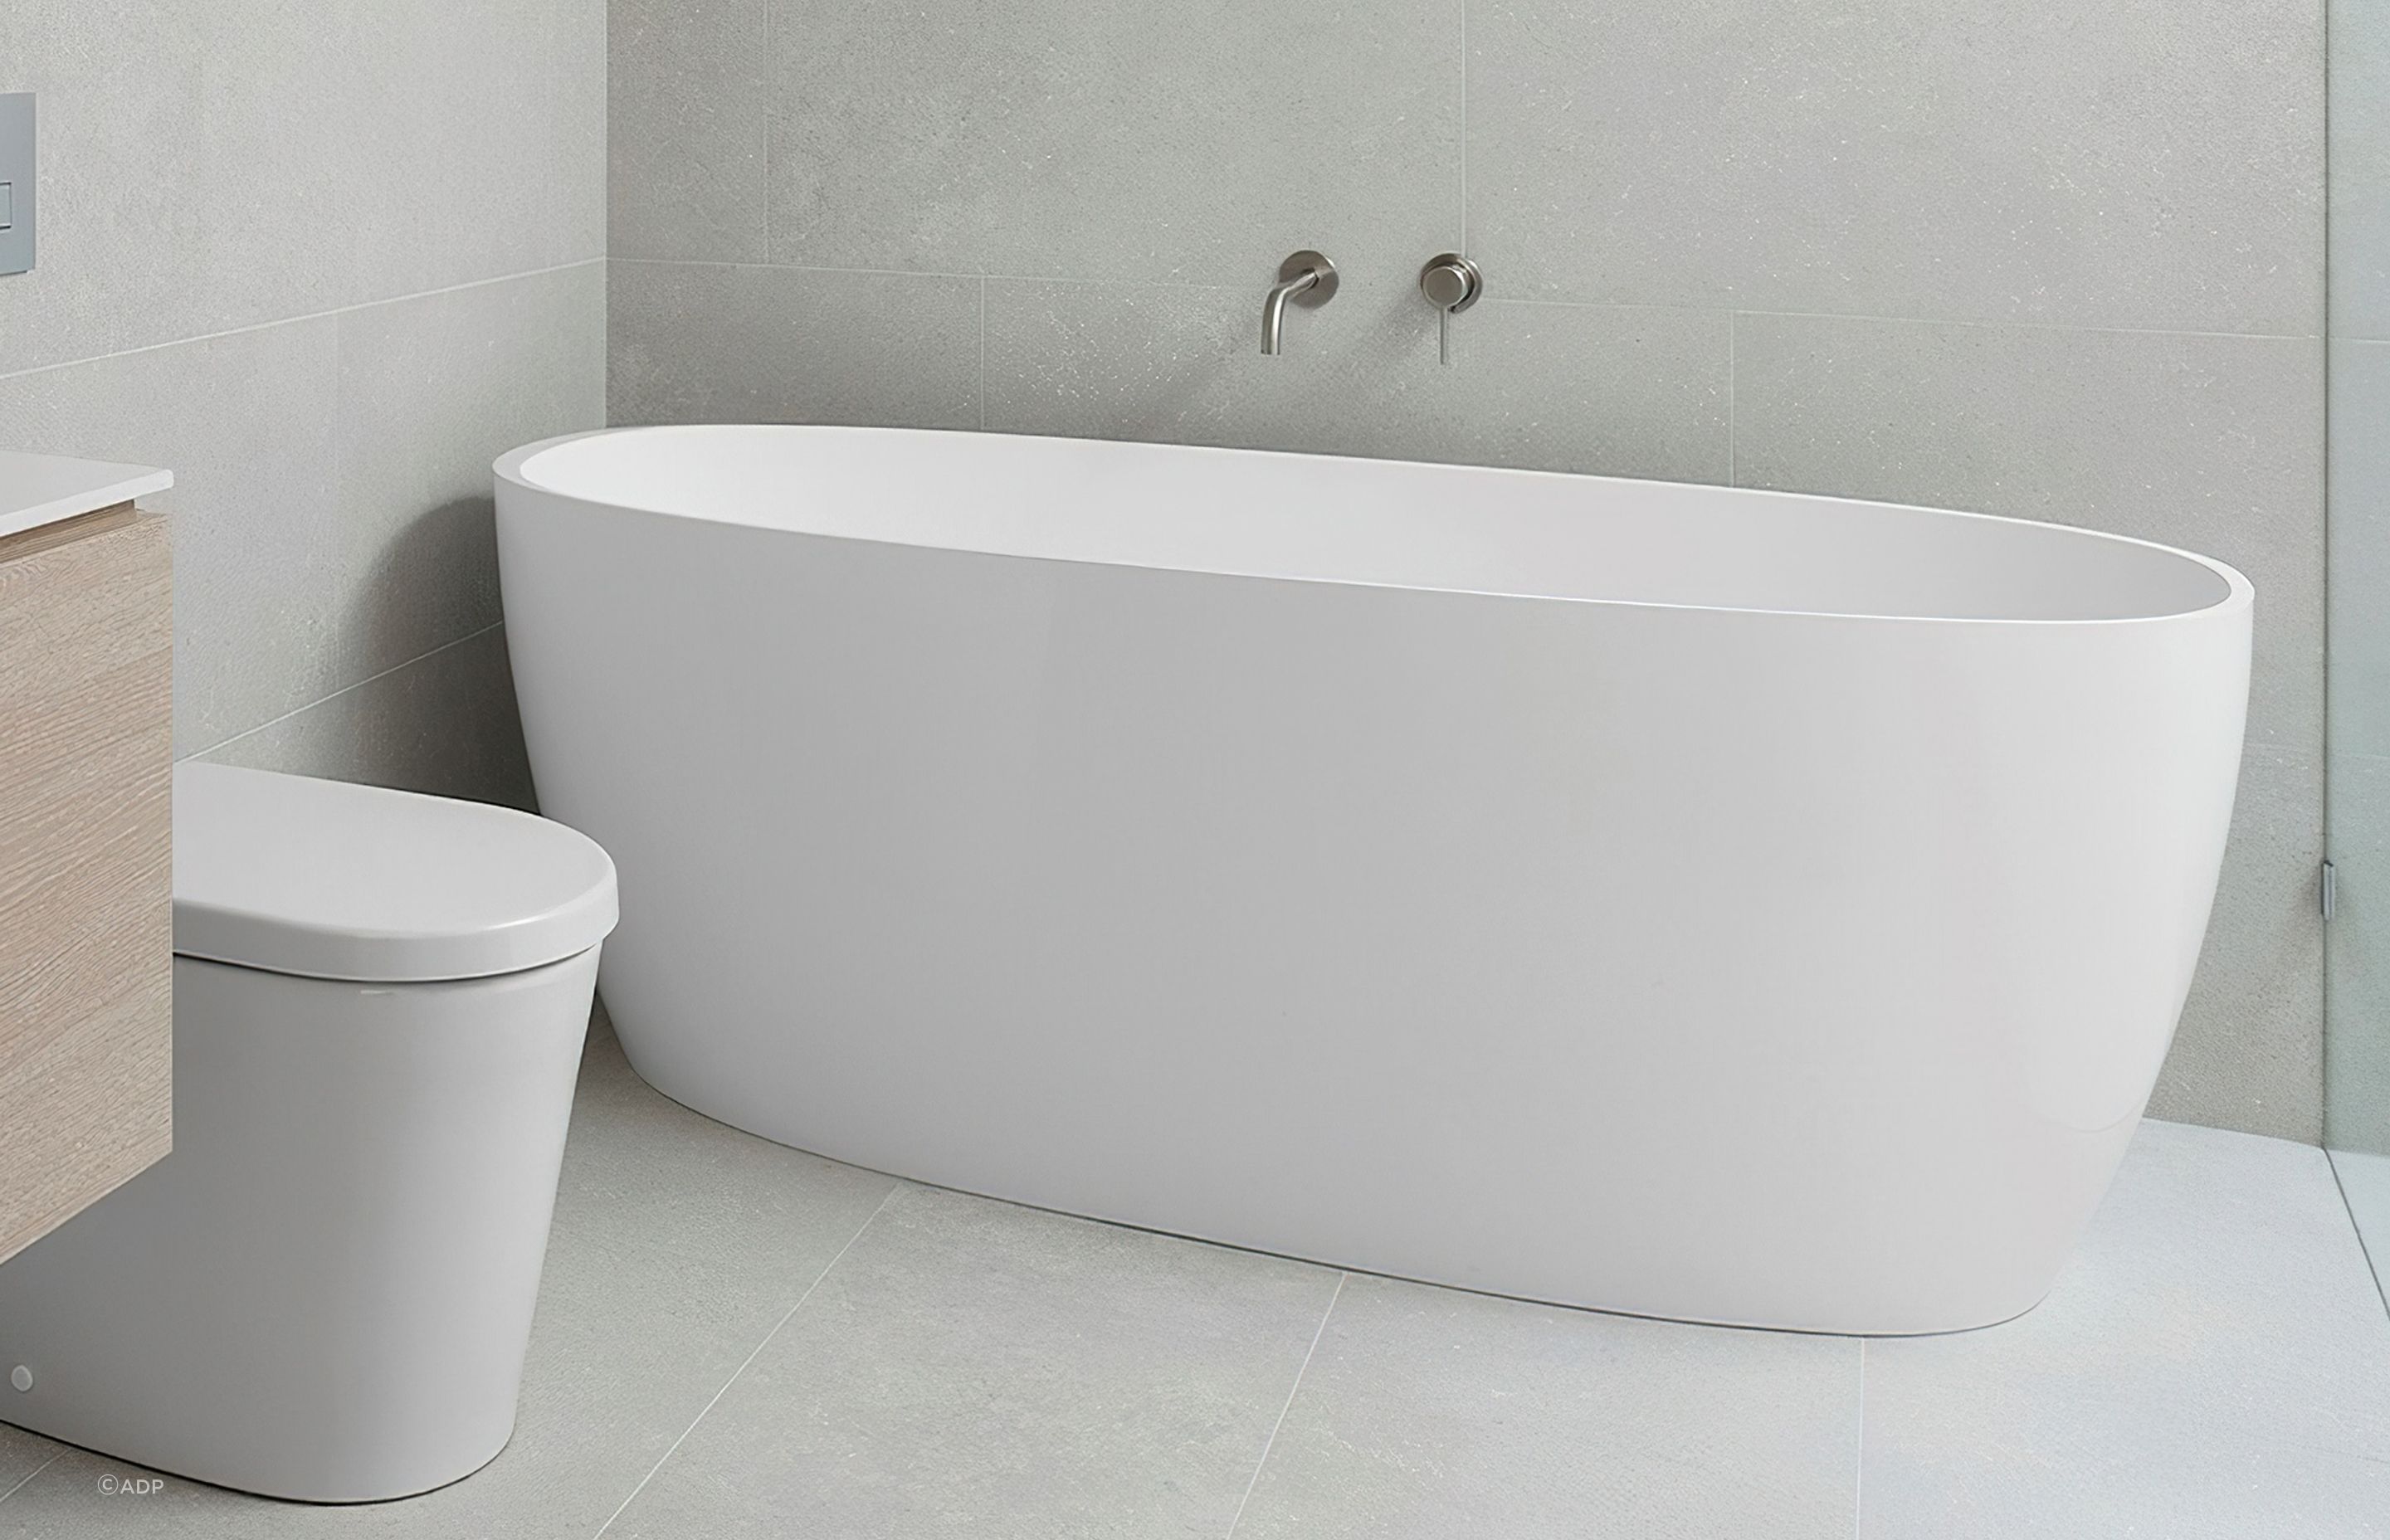 With a 370L capacity, the Submerge Bath offers a deep and soothing bath experience.